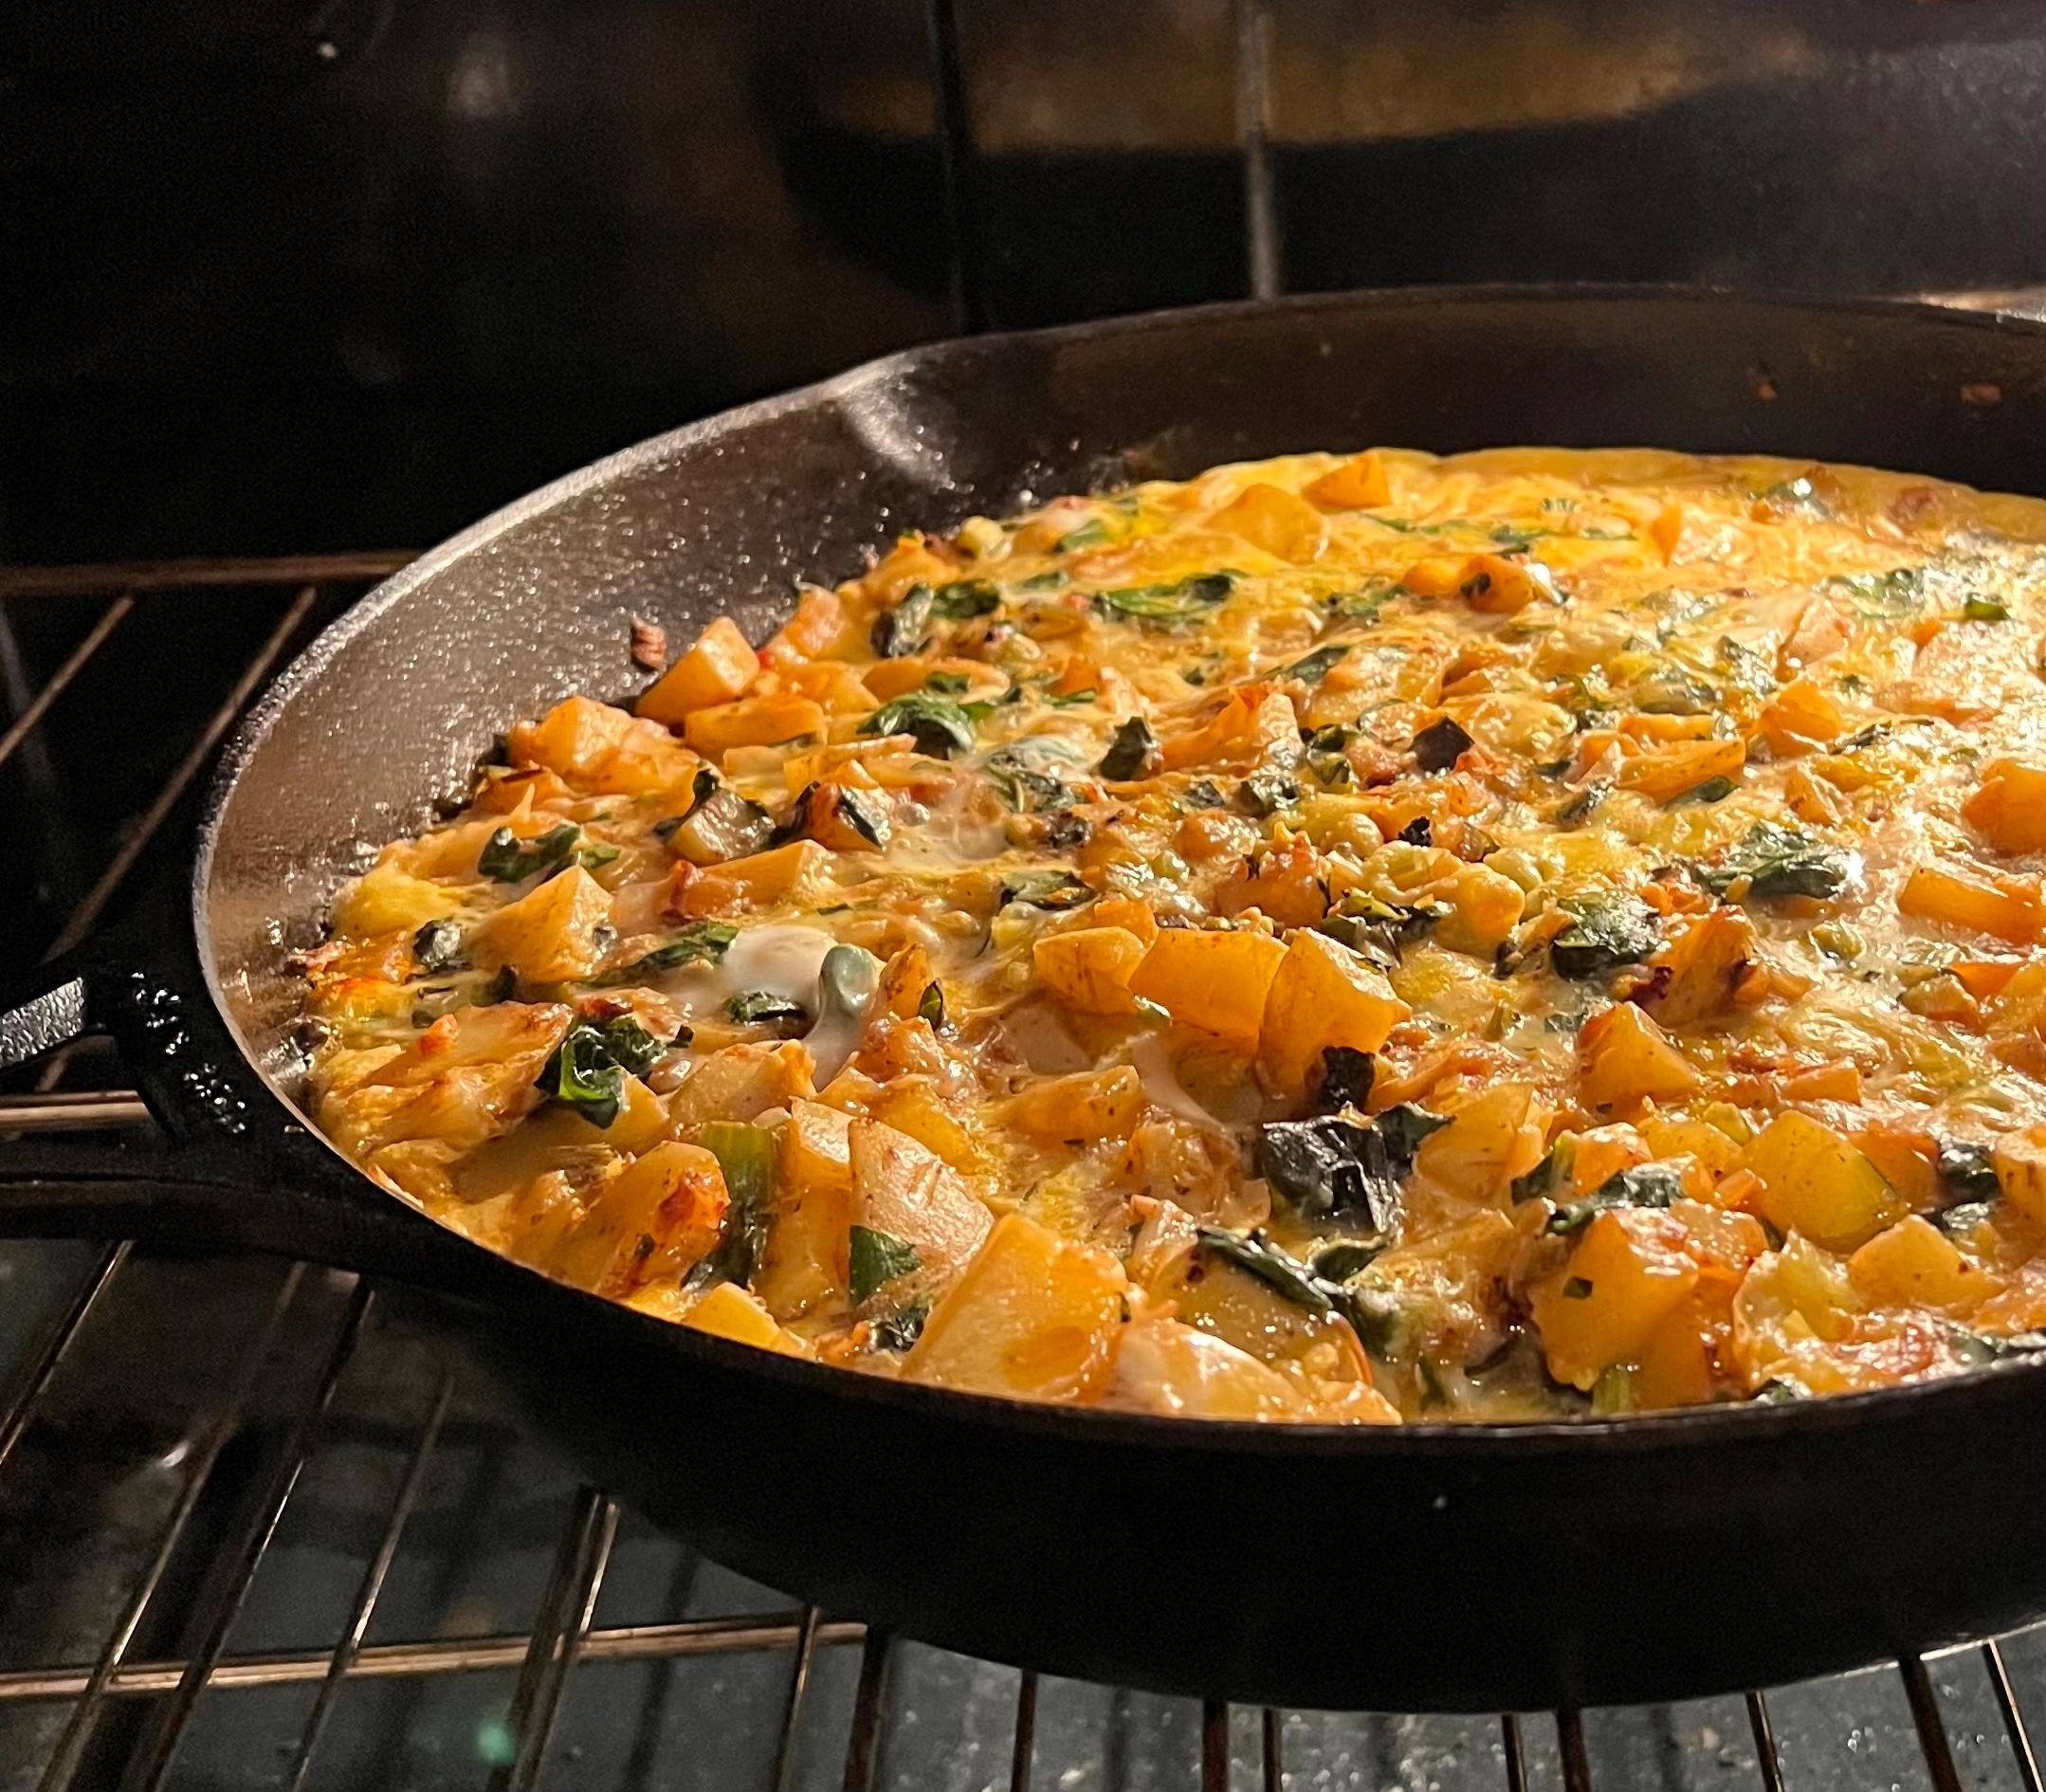 Chef Ellie Krieger’s Potato and Swiss Chard Frittata baked in a Lodge skillet. Perfection 